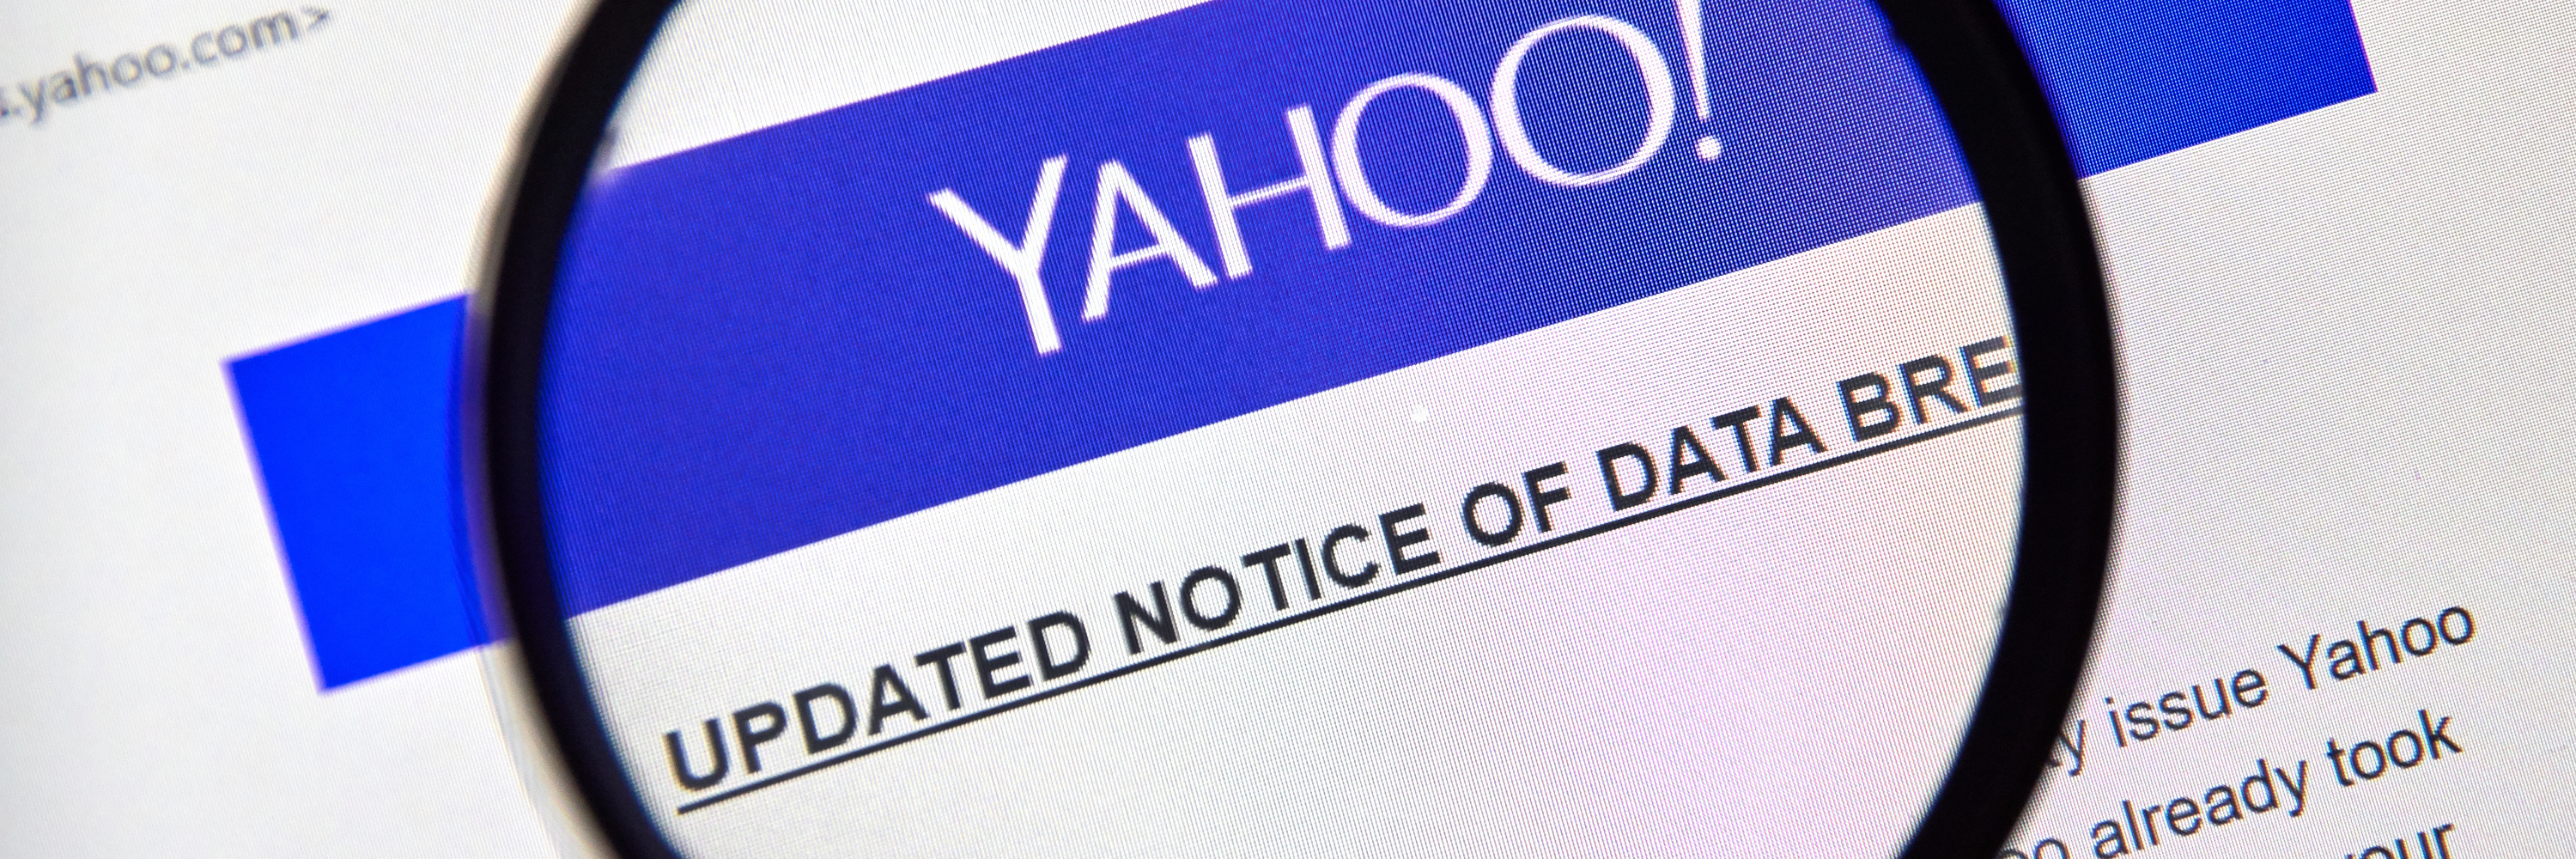 Your Old Yahoo! Emails are About to Get Read (and Sold)